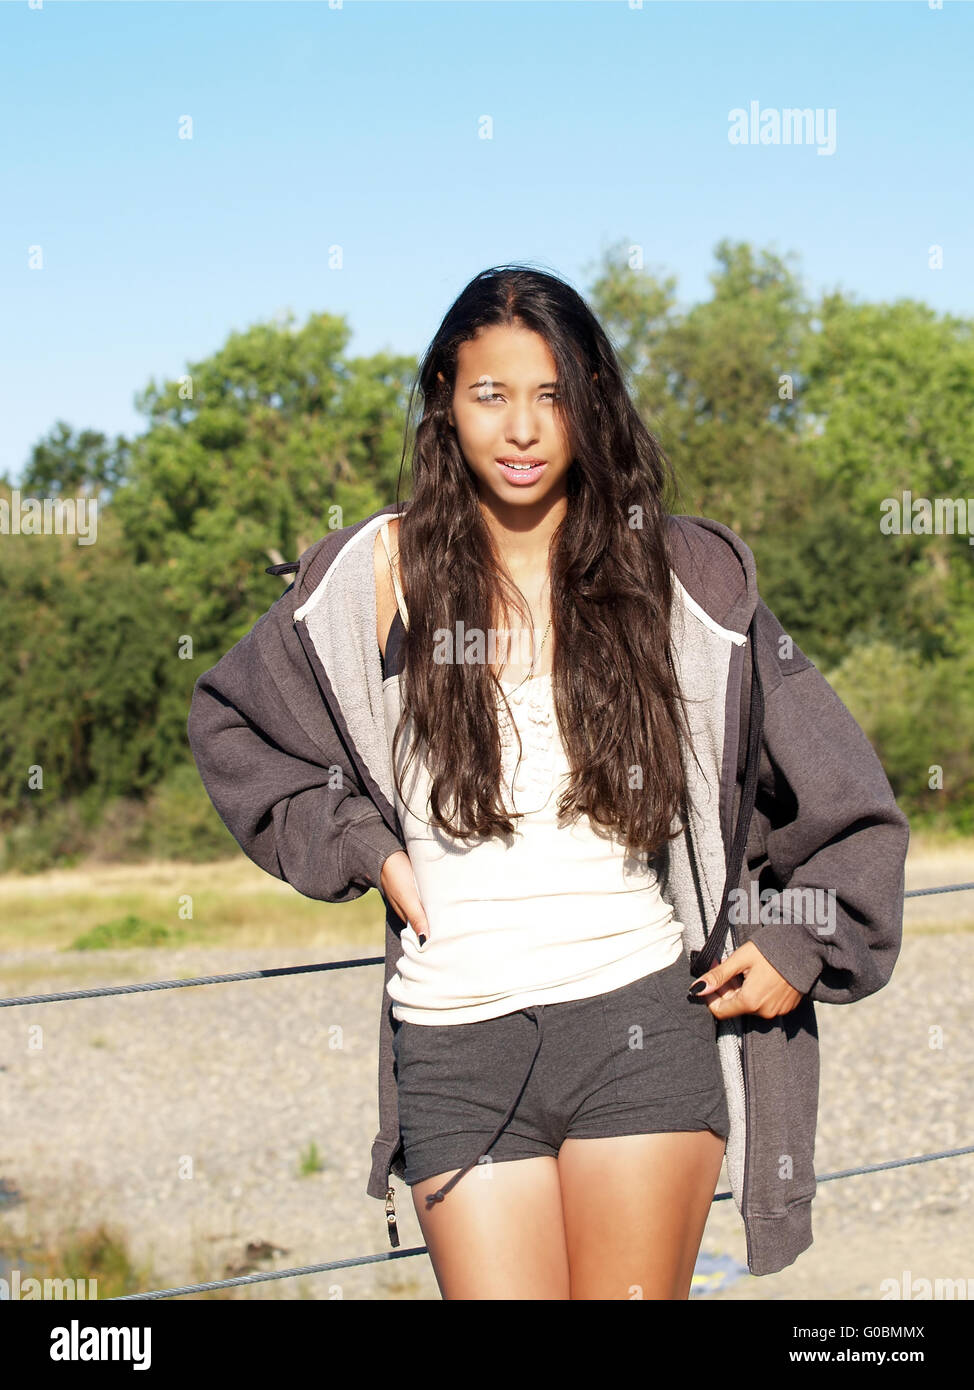 Young woman of mixed ethnicity outdoors in shorts Stock Photo - Alamy